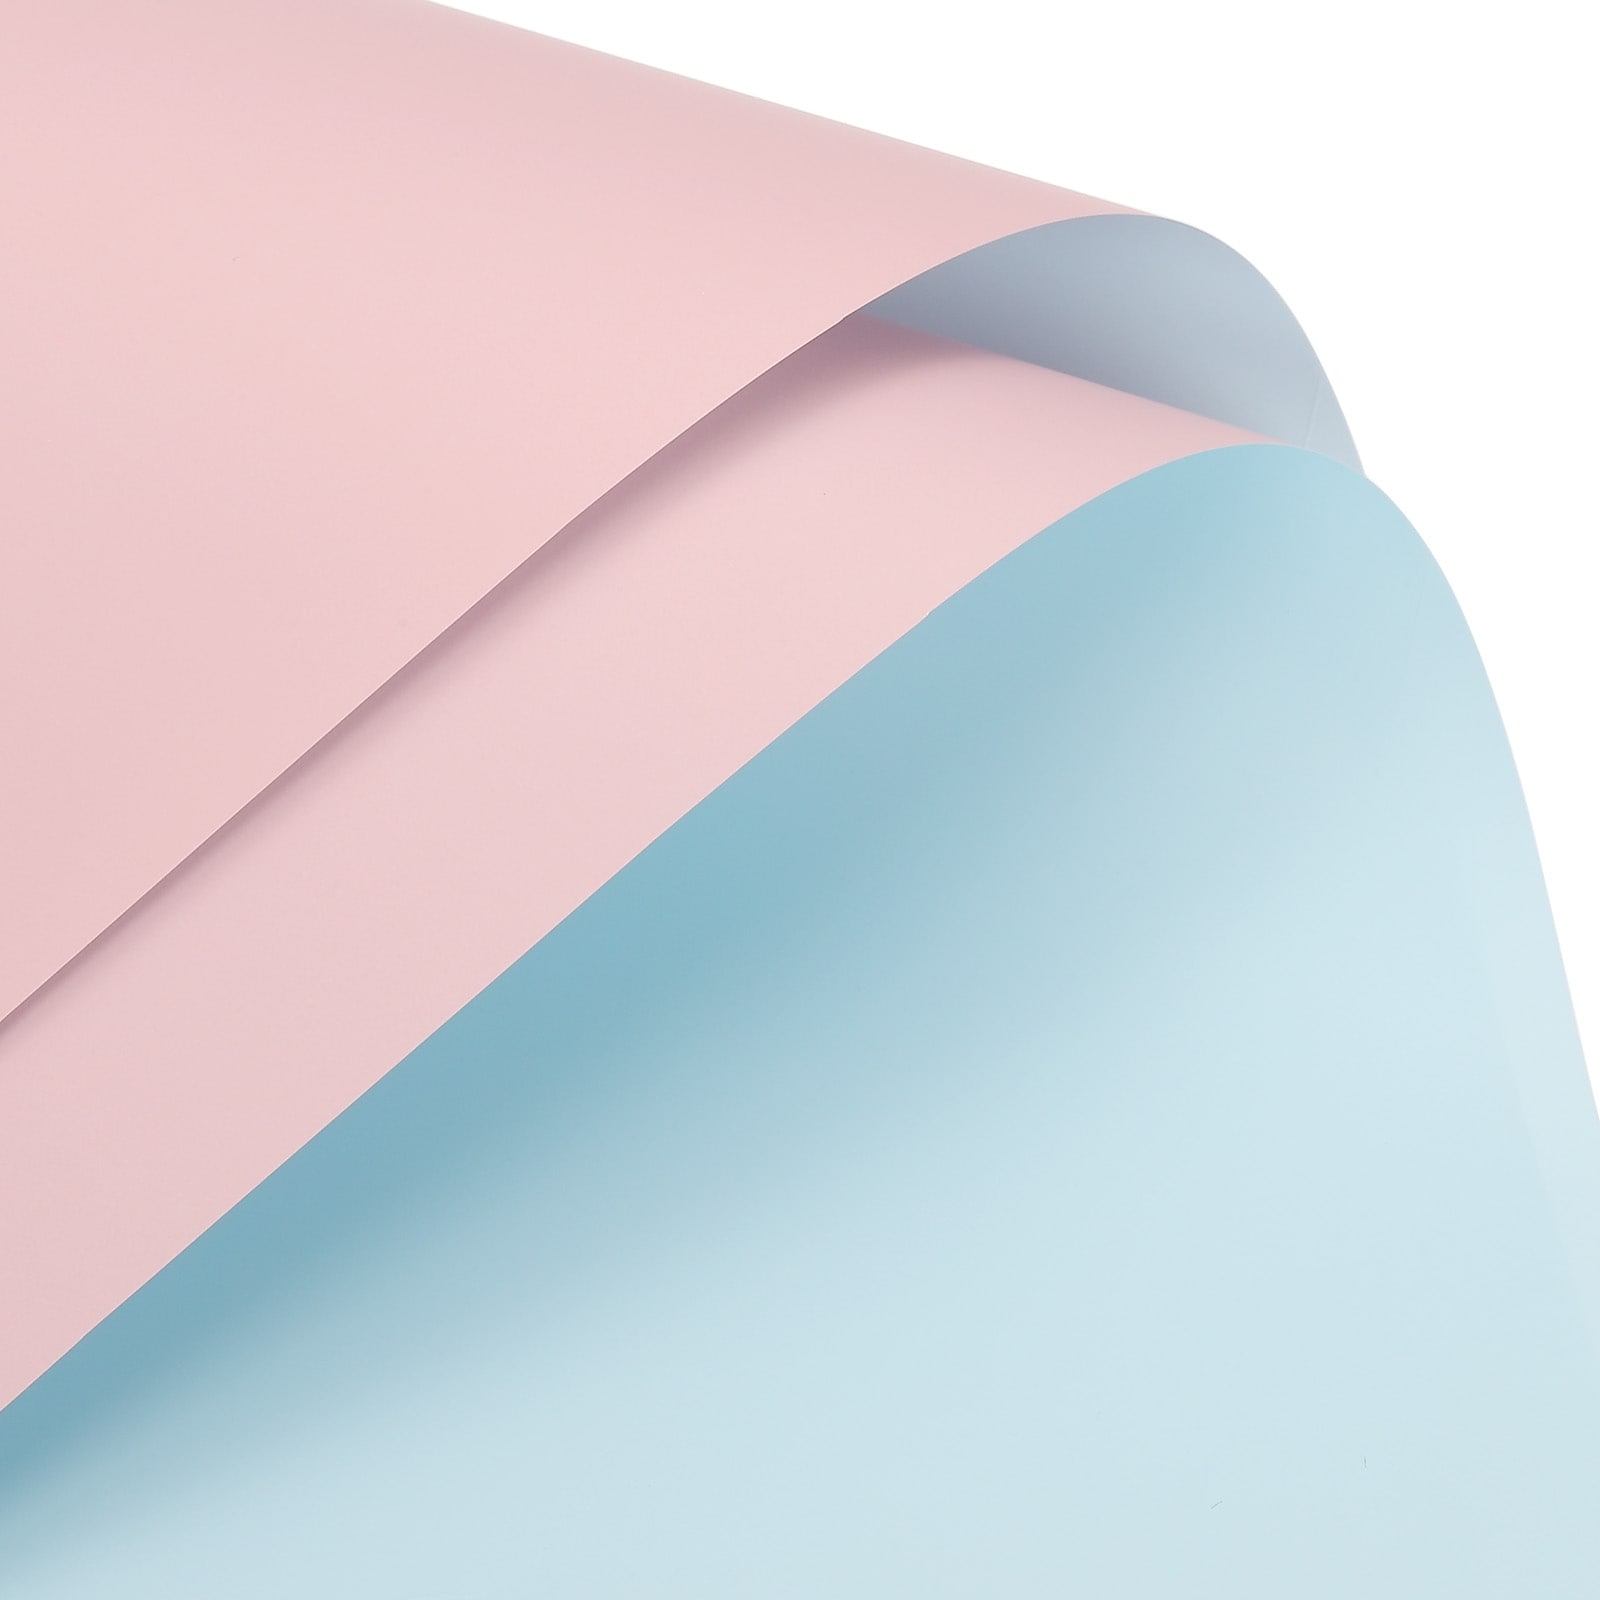 Double Sided Color Flower Wrapping Paper Light Pink+Light Blue 22.8x22.8  - Light Pink and Light Blue - Bed Bath & Beyond - 37522087